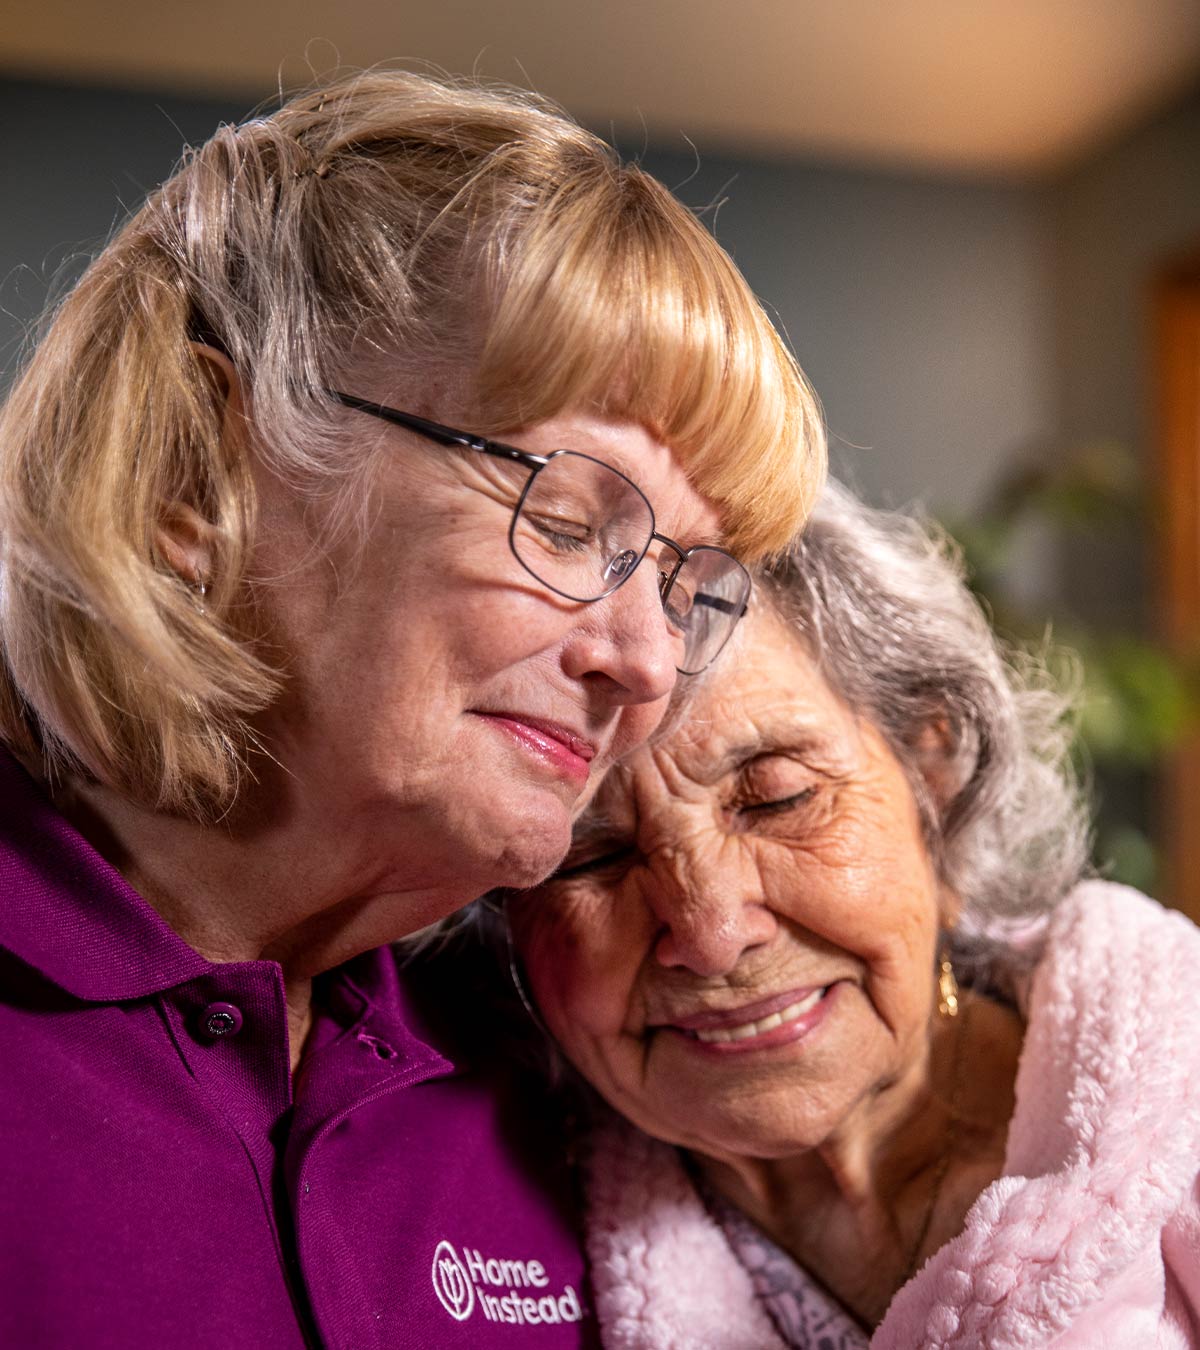 CAREGiver providing in-home senior care services. Home Instead of Saskatoon, SK provides Elder Care to aging adults. 